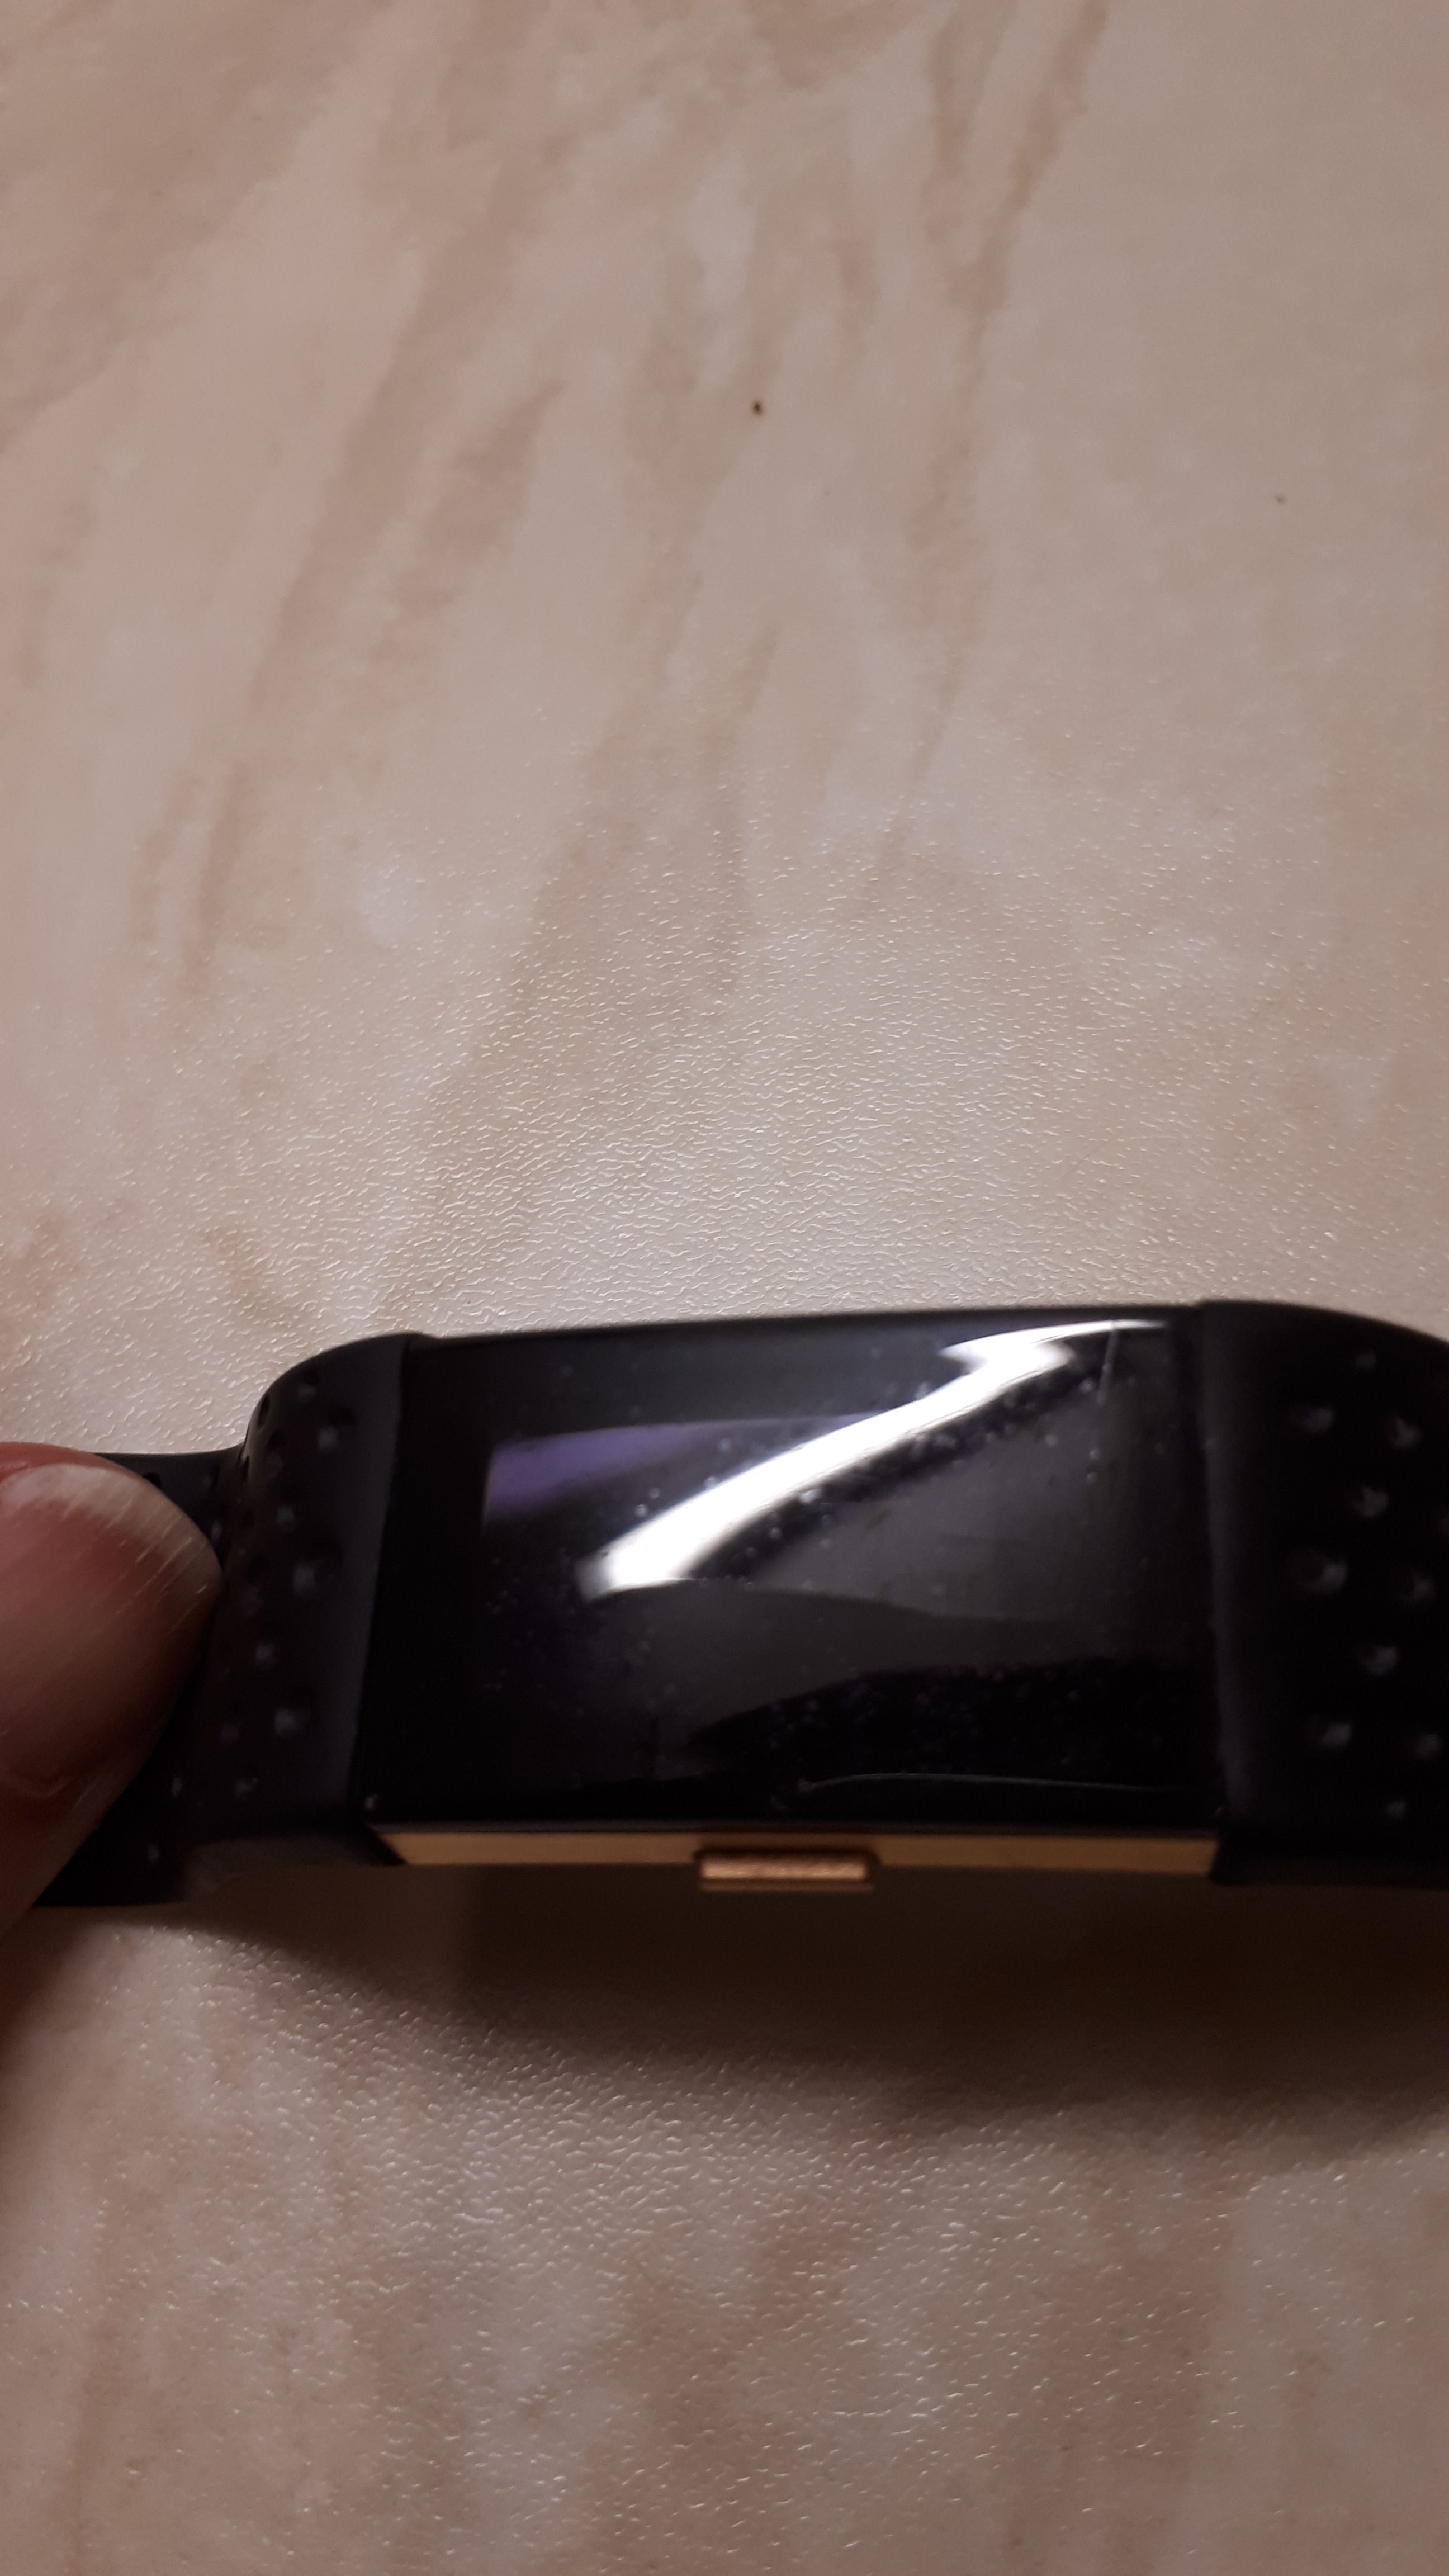 fitbit charge 2 screen is black